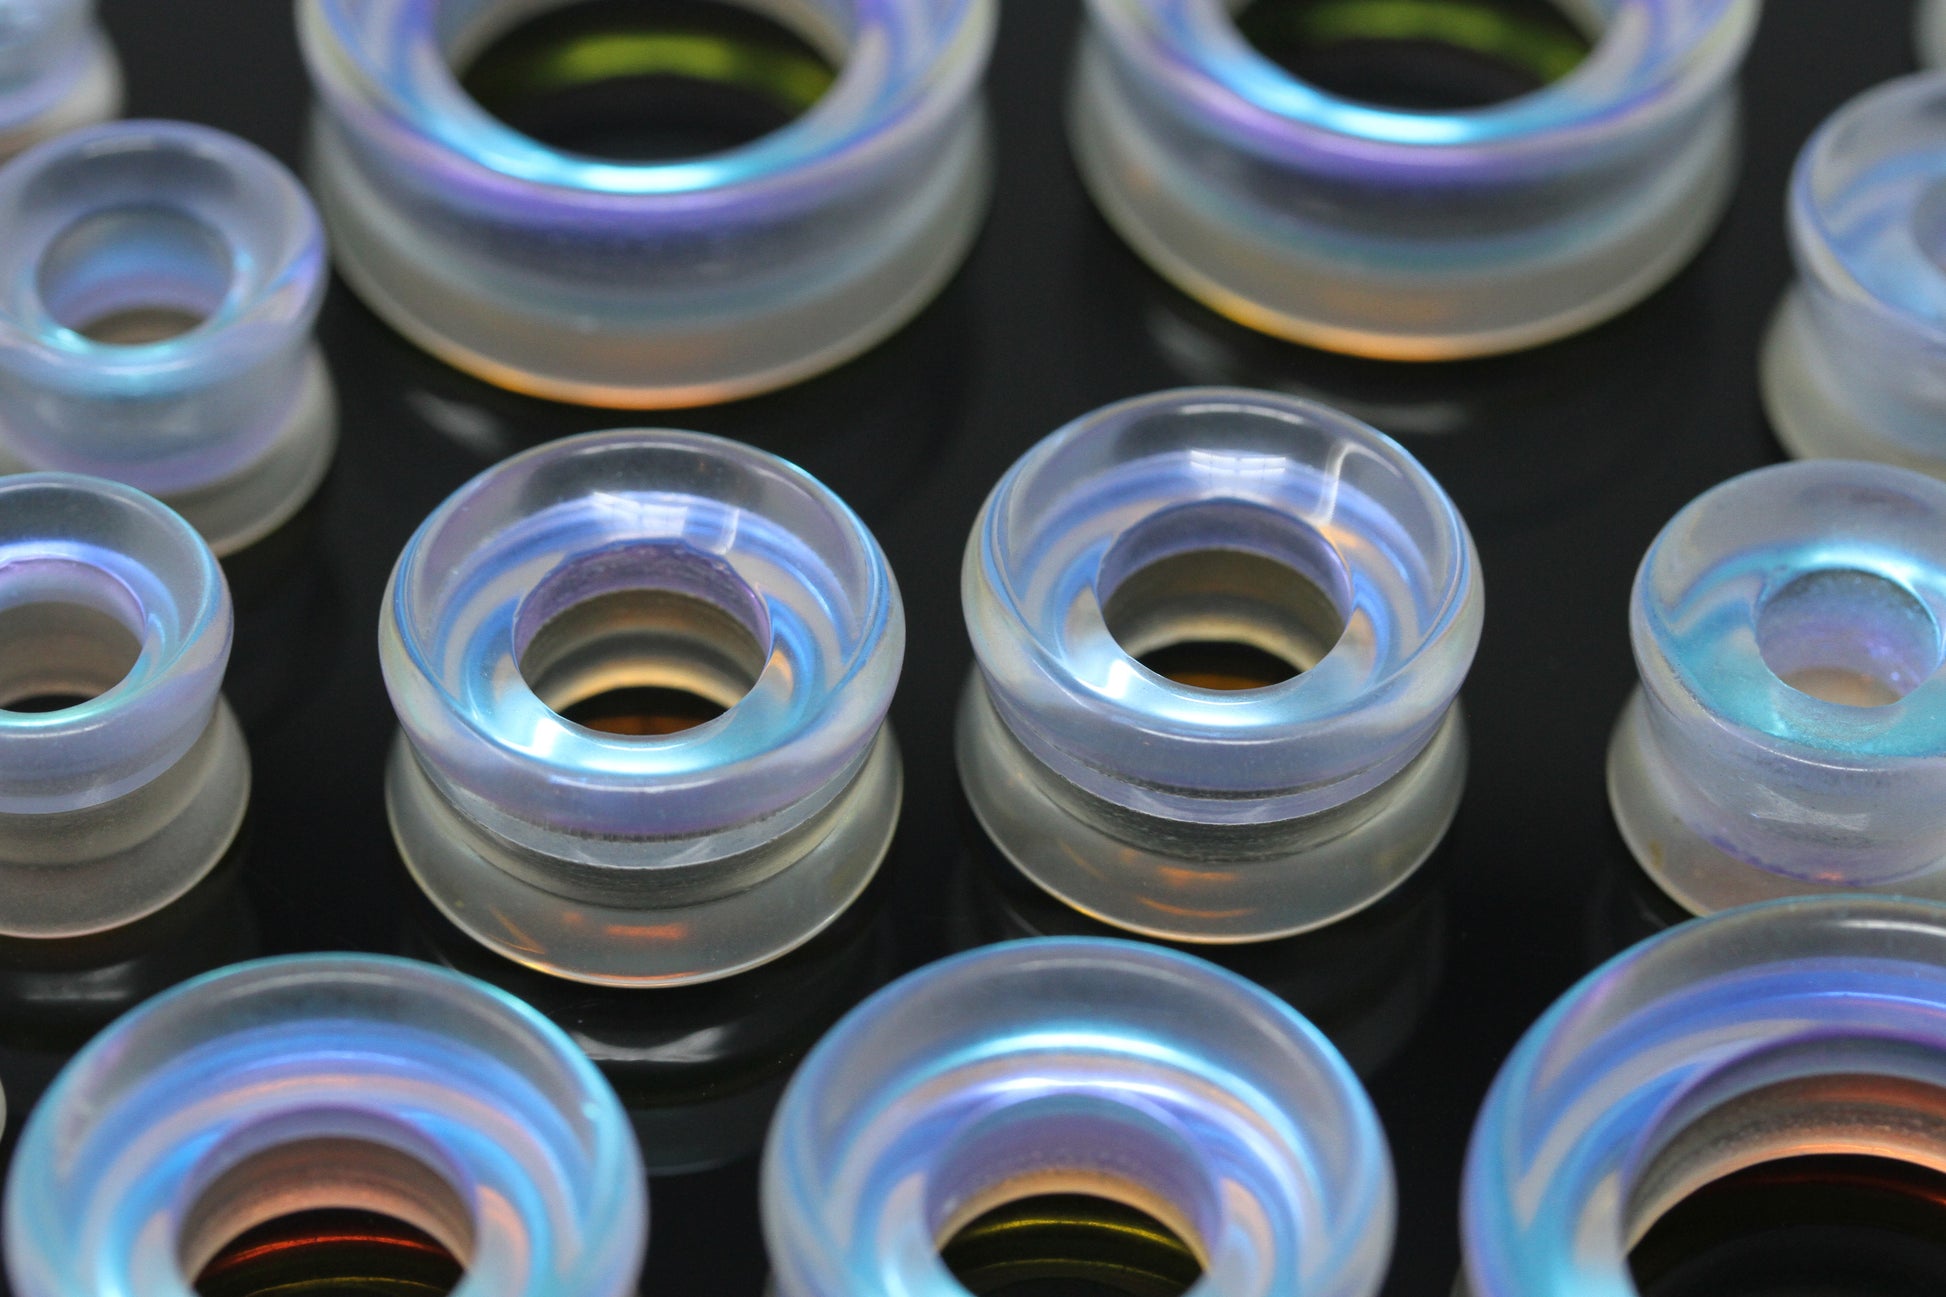 Holographic tunnel plugs